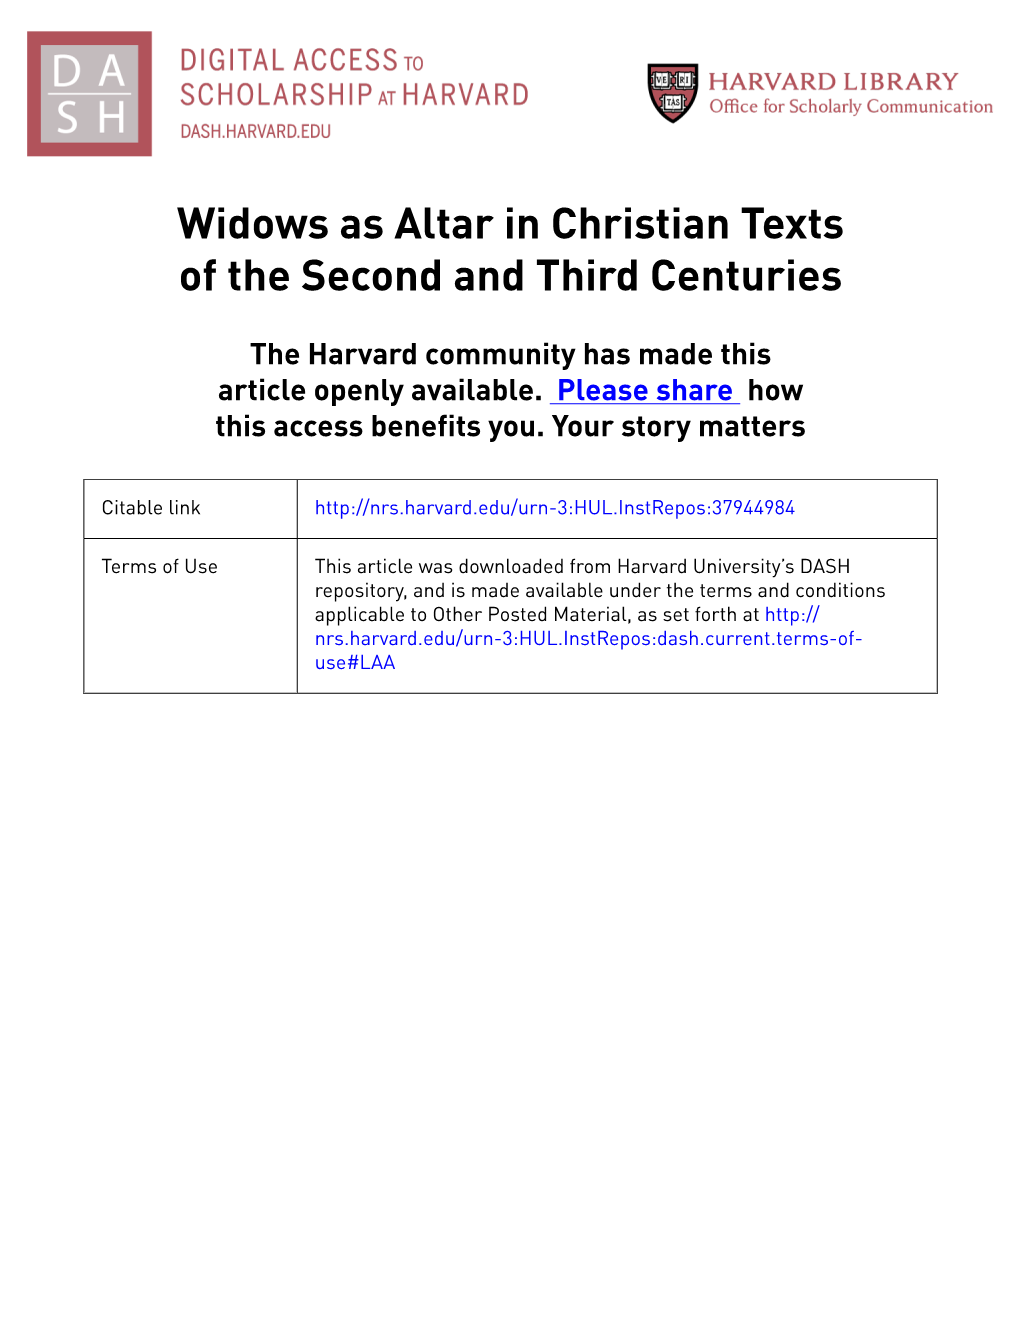 Widows As Altar in Christian Texts of the Second and Third Centuries